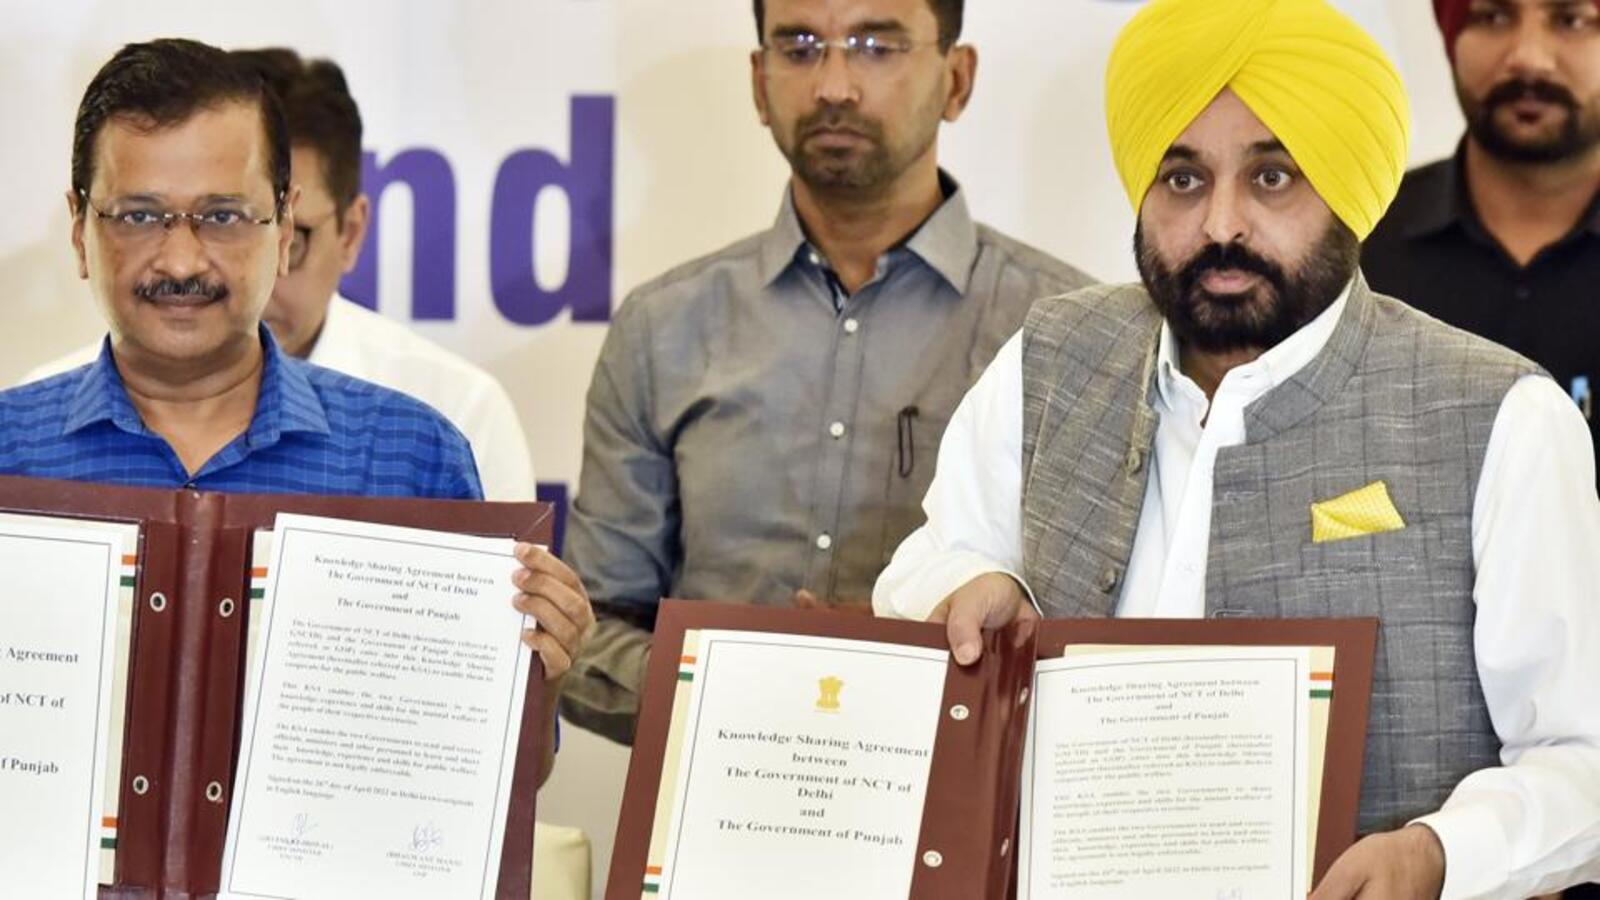 Punjab cabinet approves one MLA, one pension, recruitment to 26k govt jobs  | Latest News India - Hindustan Times